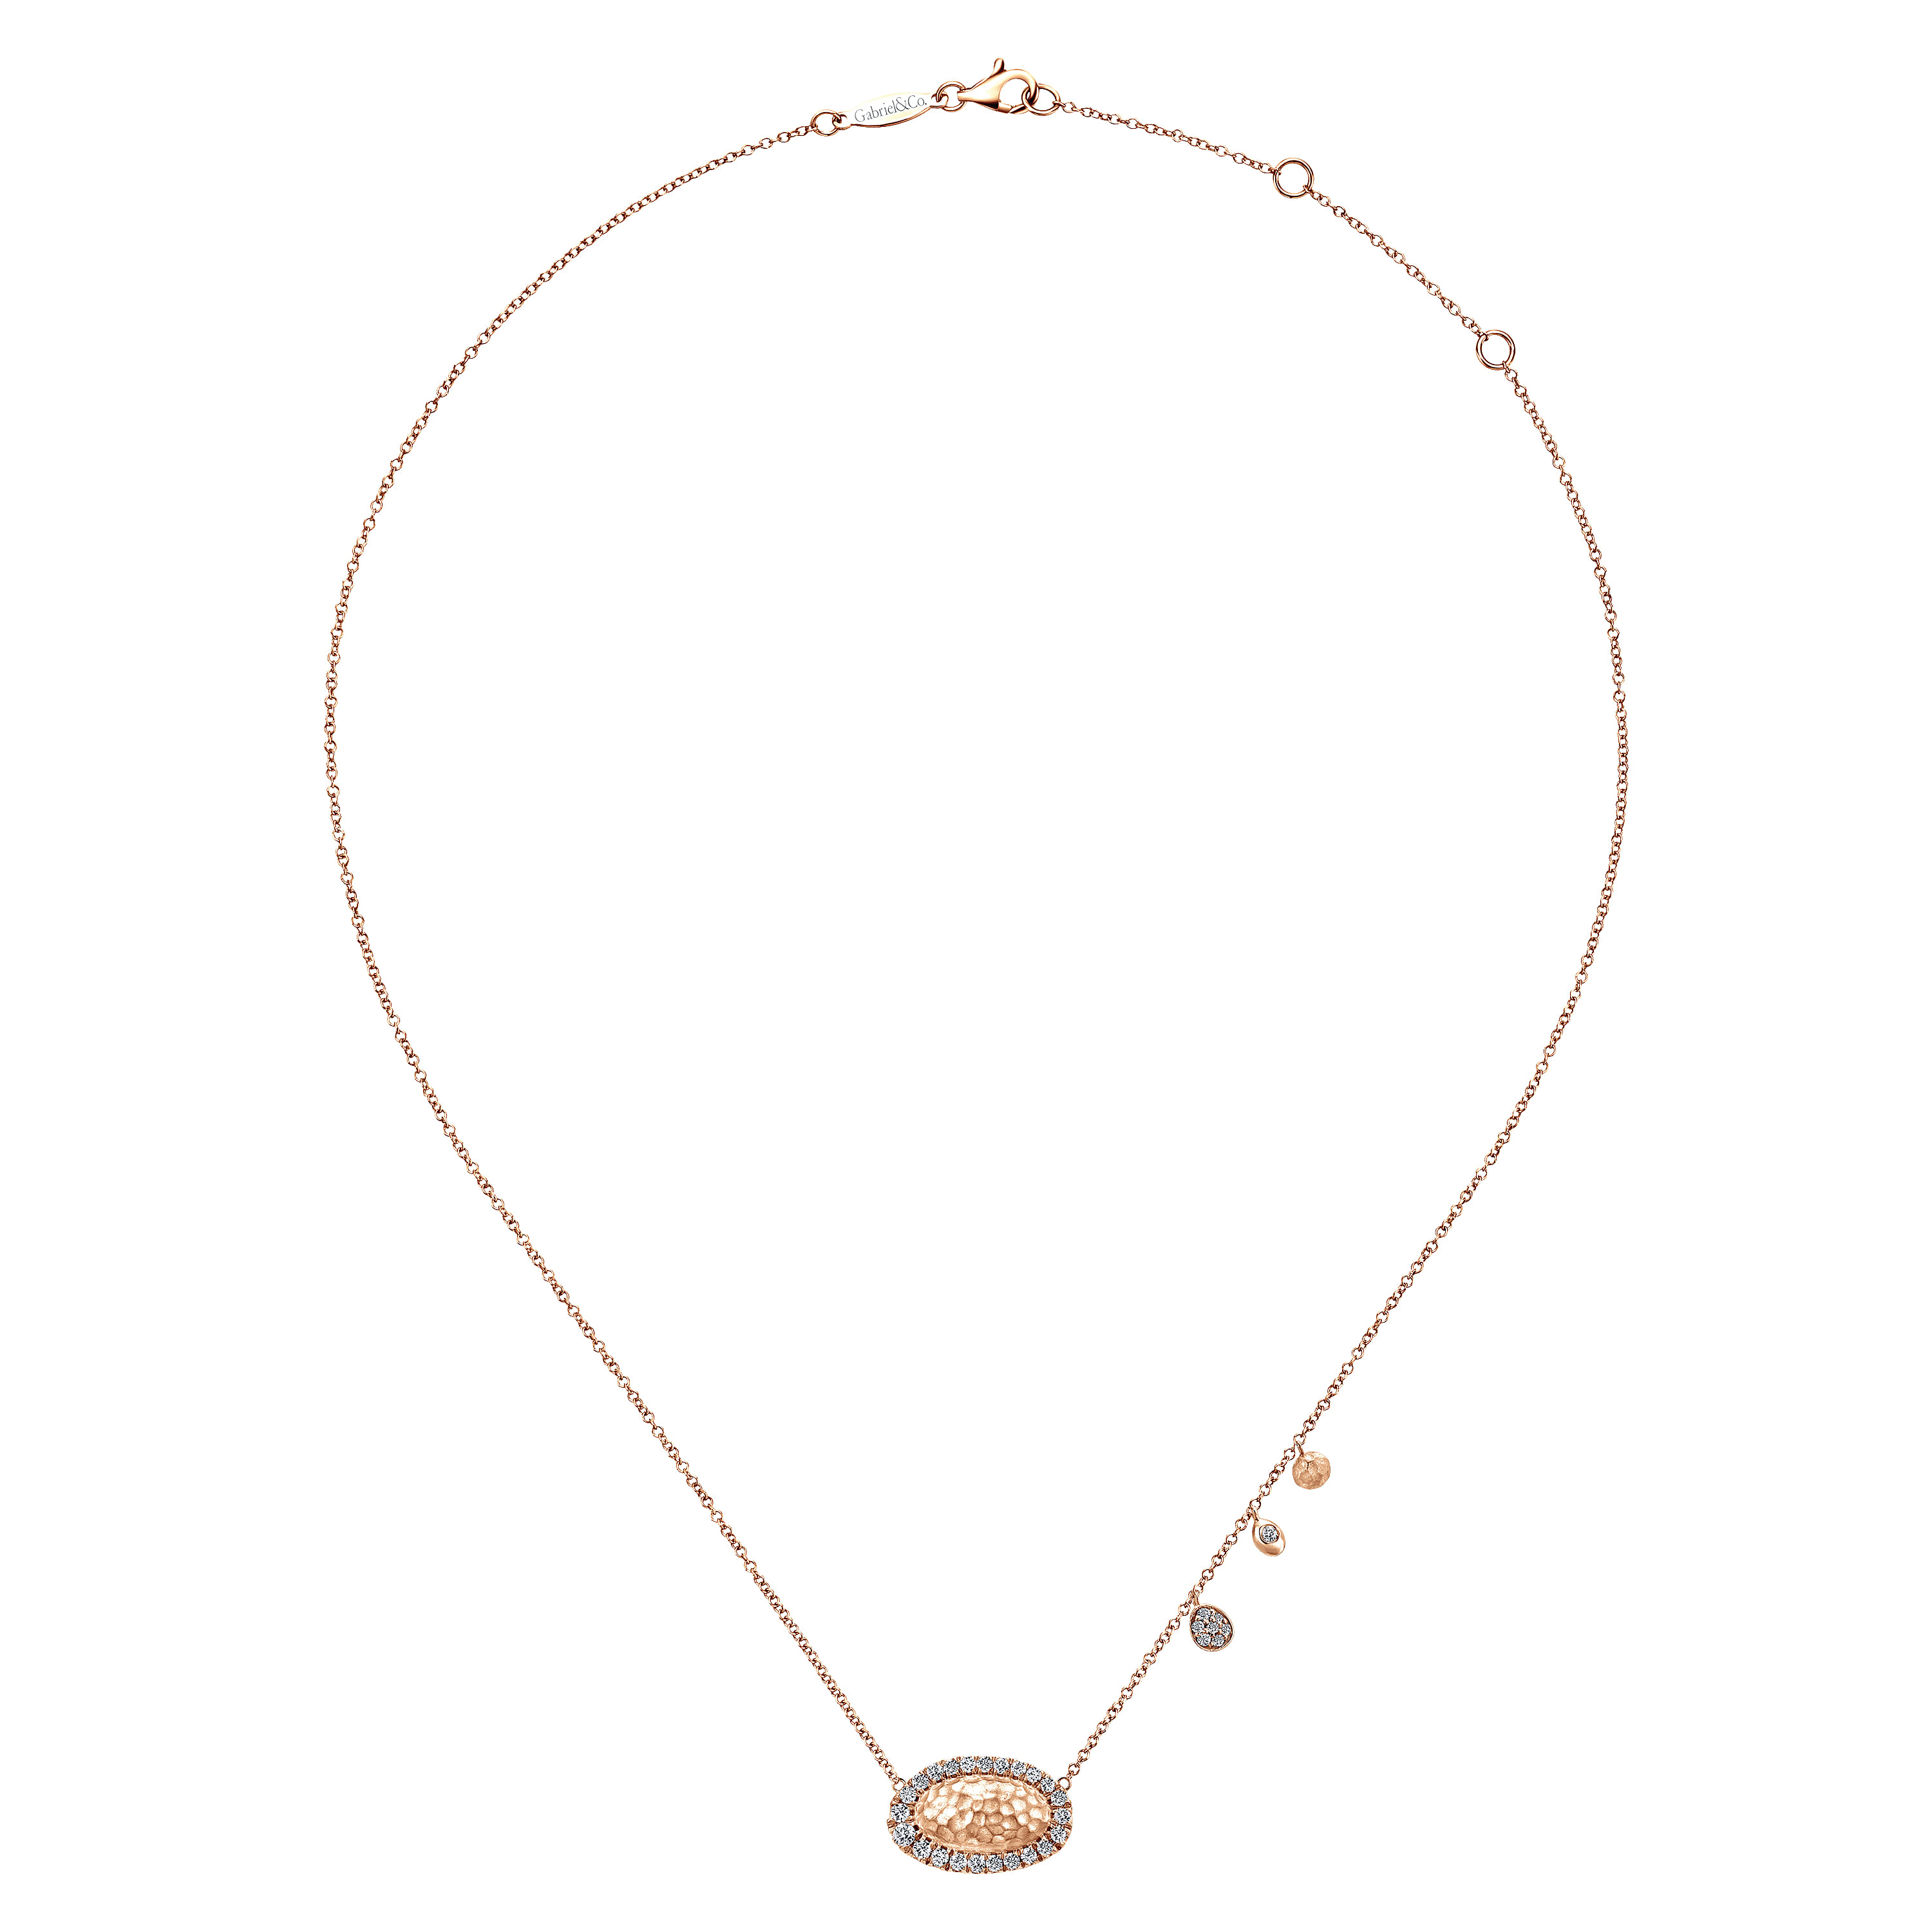 Hammered 14K Rose Gold Oval Pendant Necklace with Diamond Halo and Accent Drops